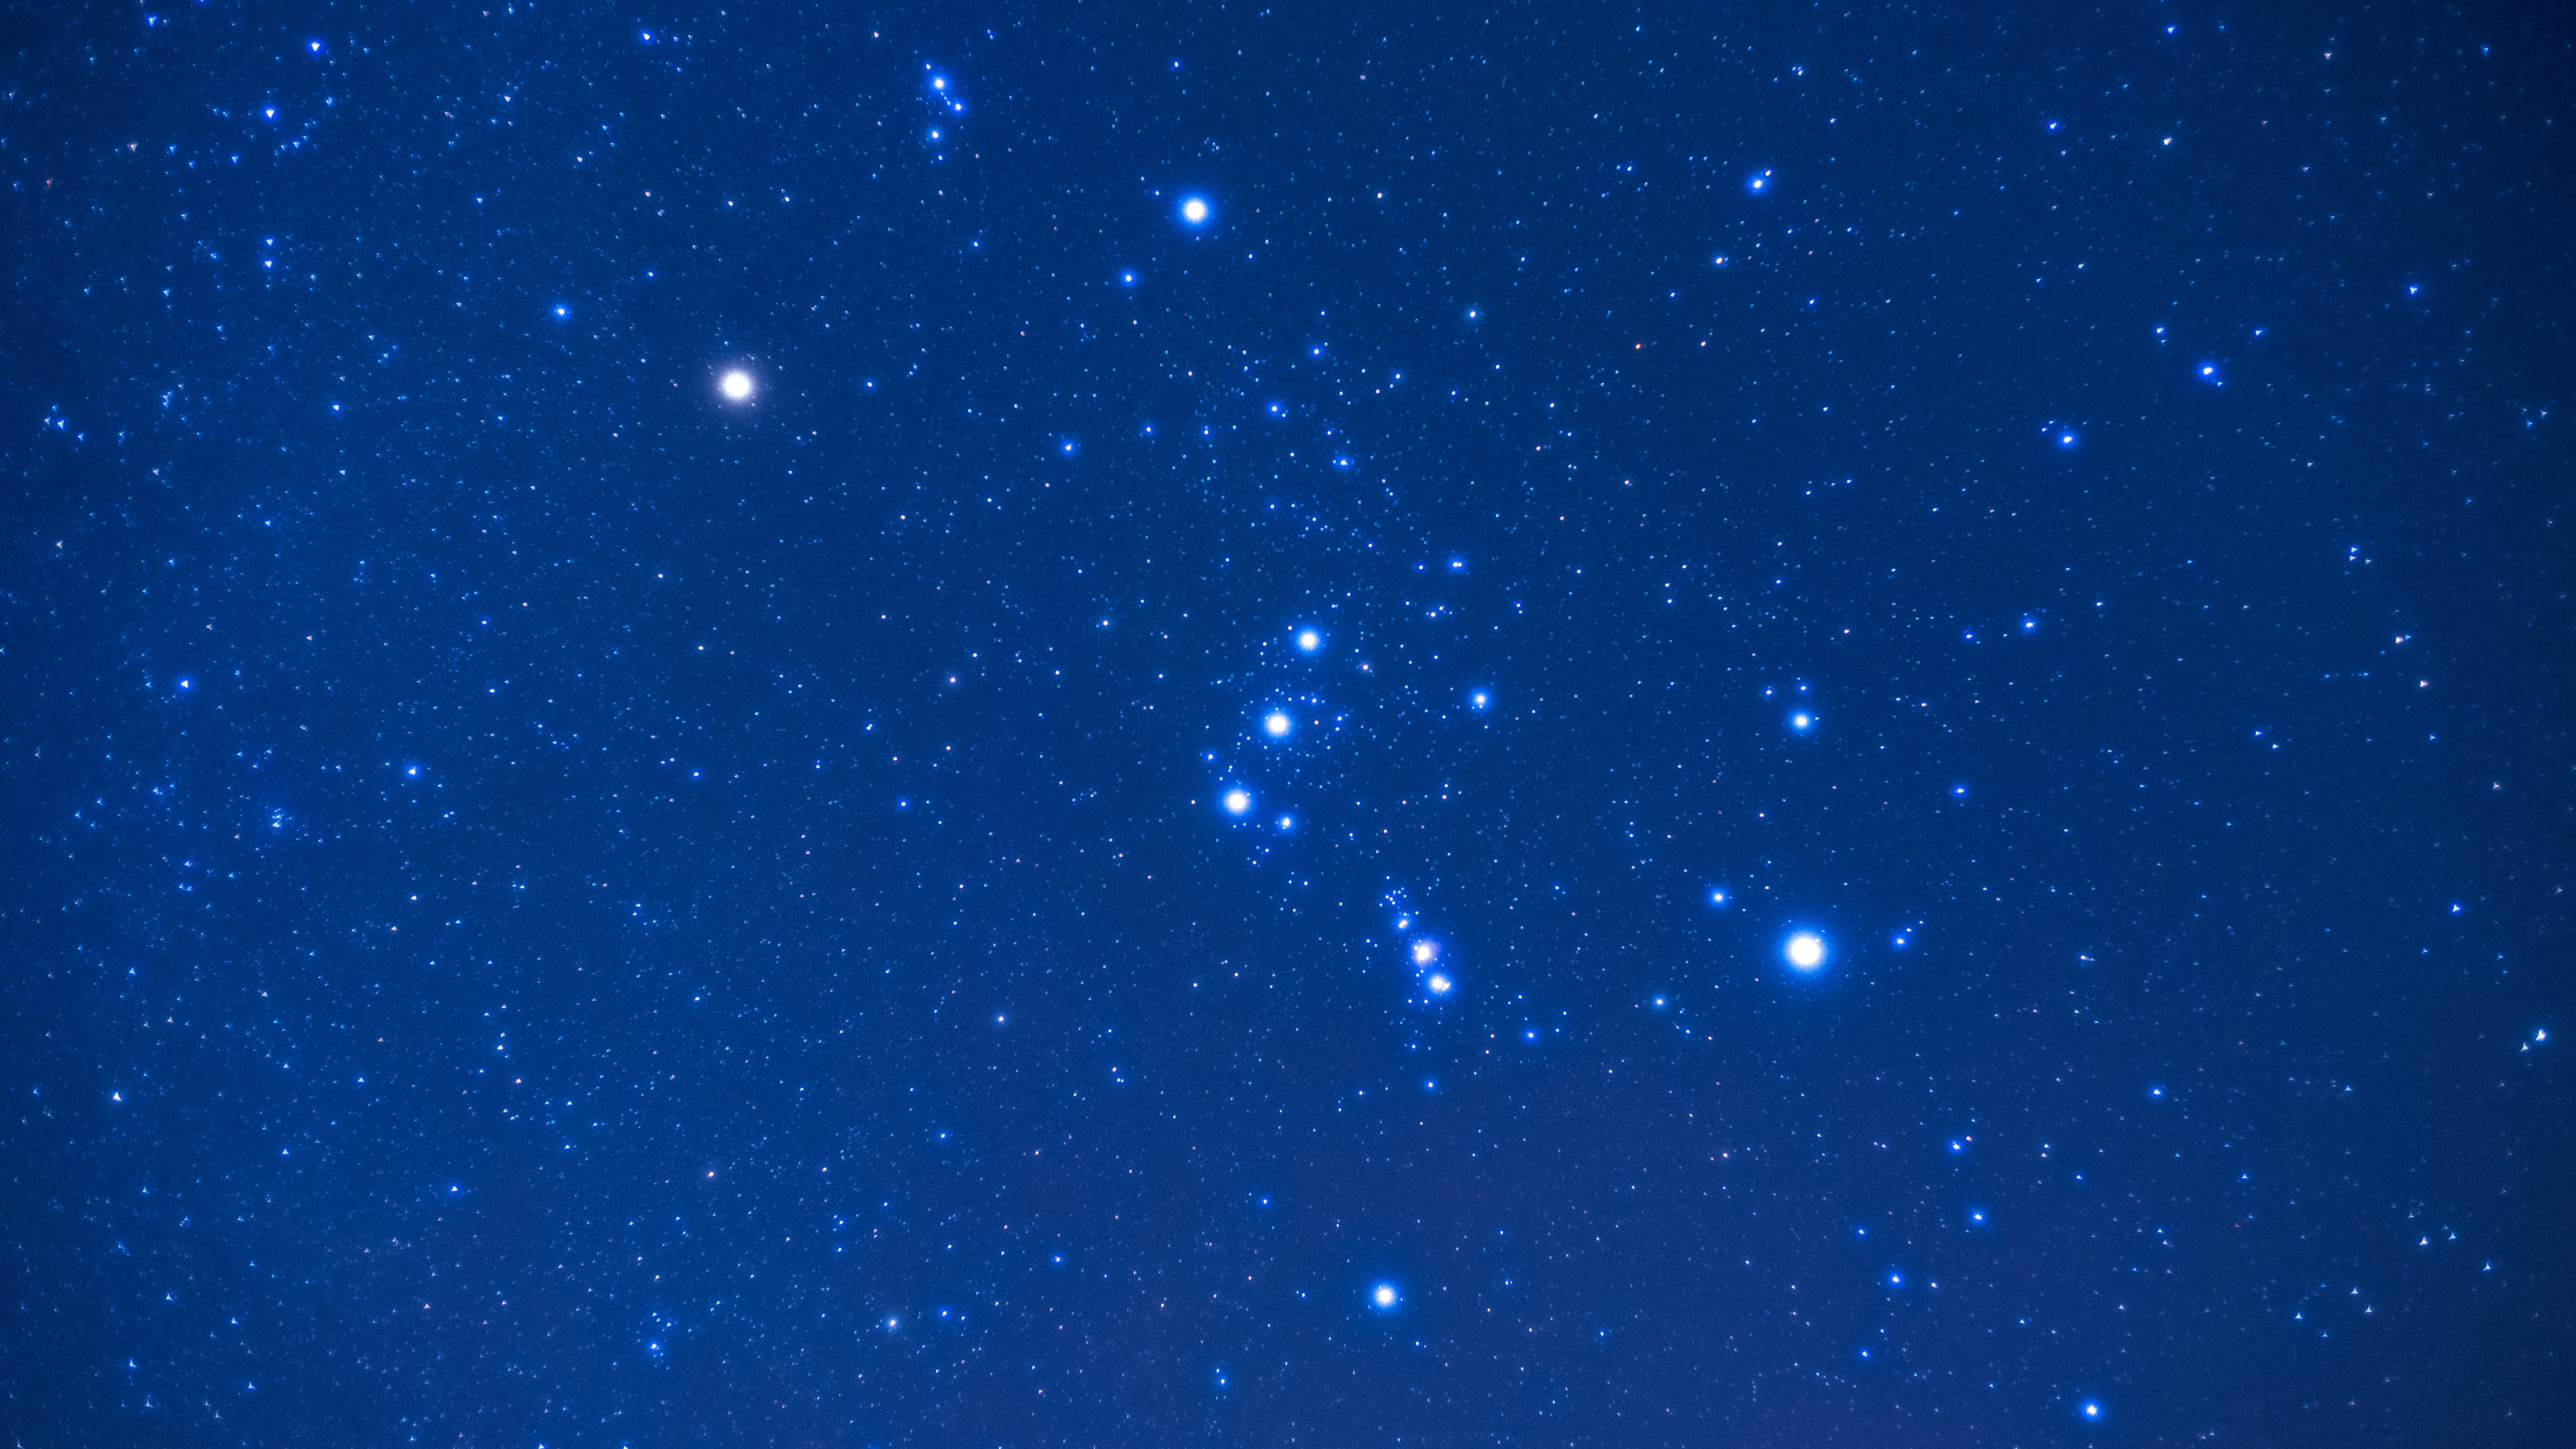 Blue and White Stars in Blue Sky. Wallpaper in 3840x2160 Resolution